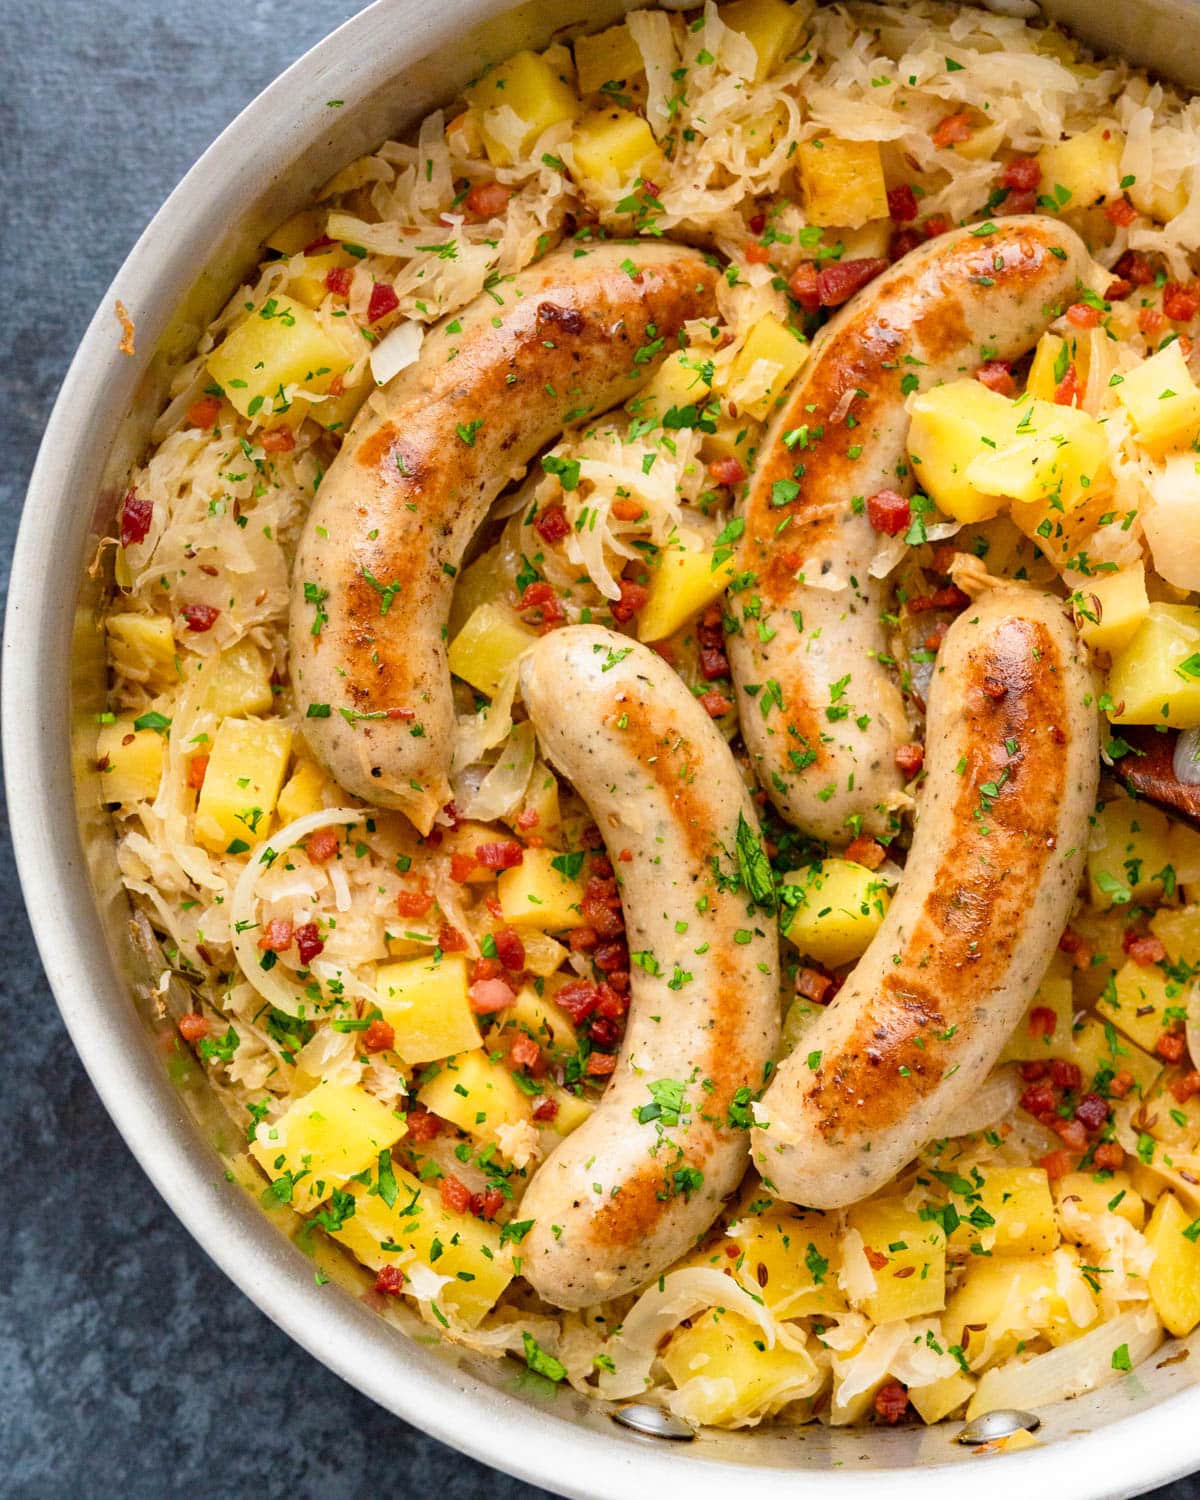 A skillet choucroute with sausage, apples and sauerkraut.